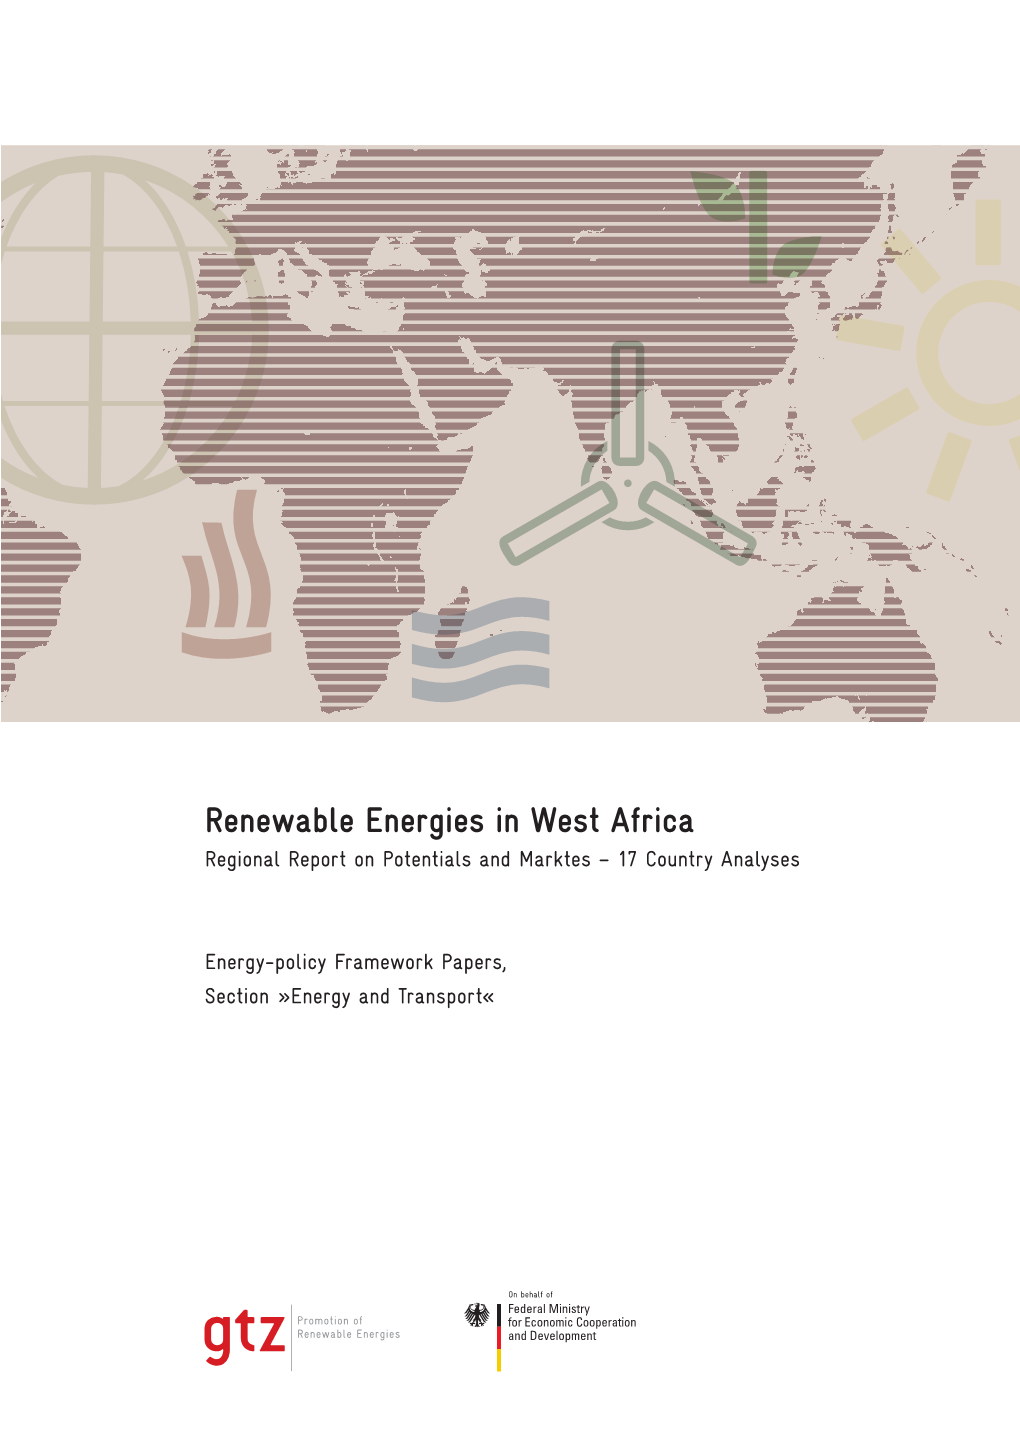 Renewable Energies in West Africa Regional Report on Potentials and Marktes – 17 Country Analyses